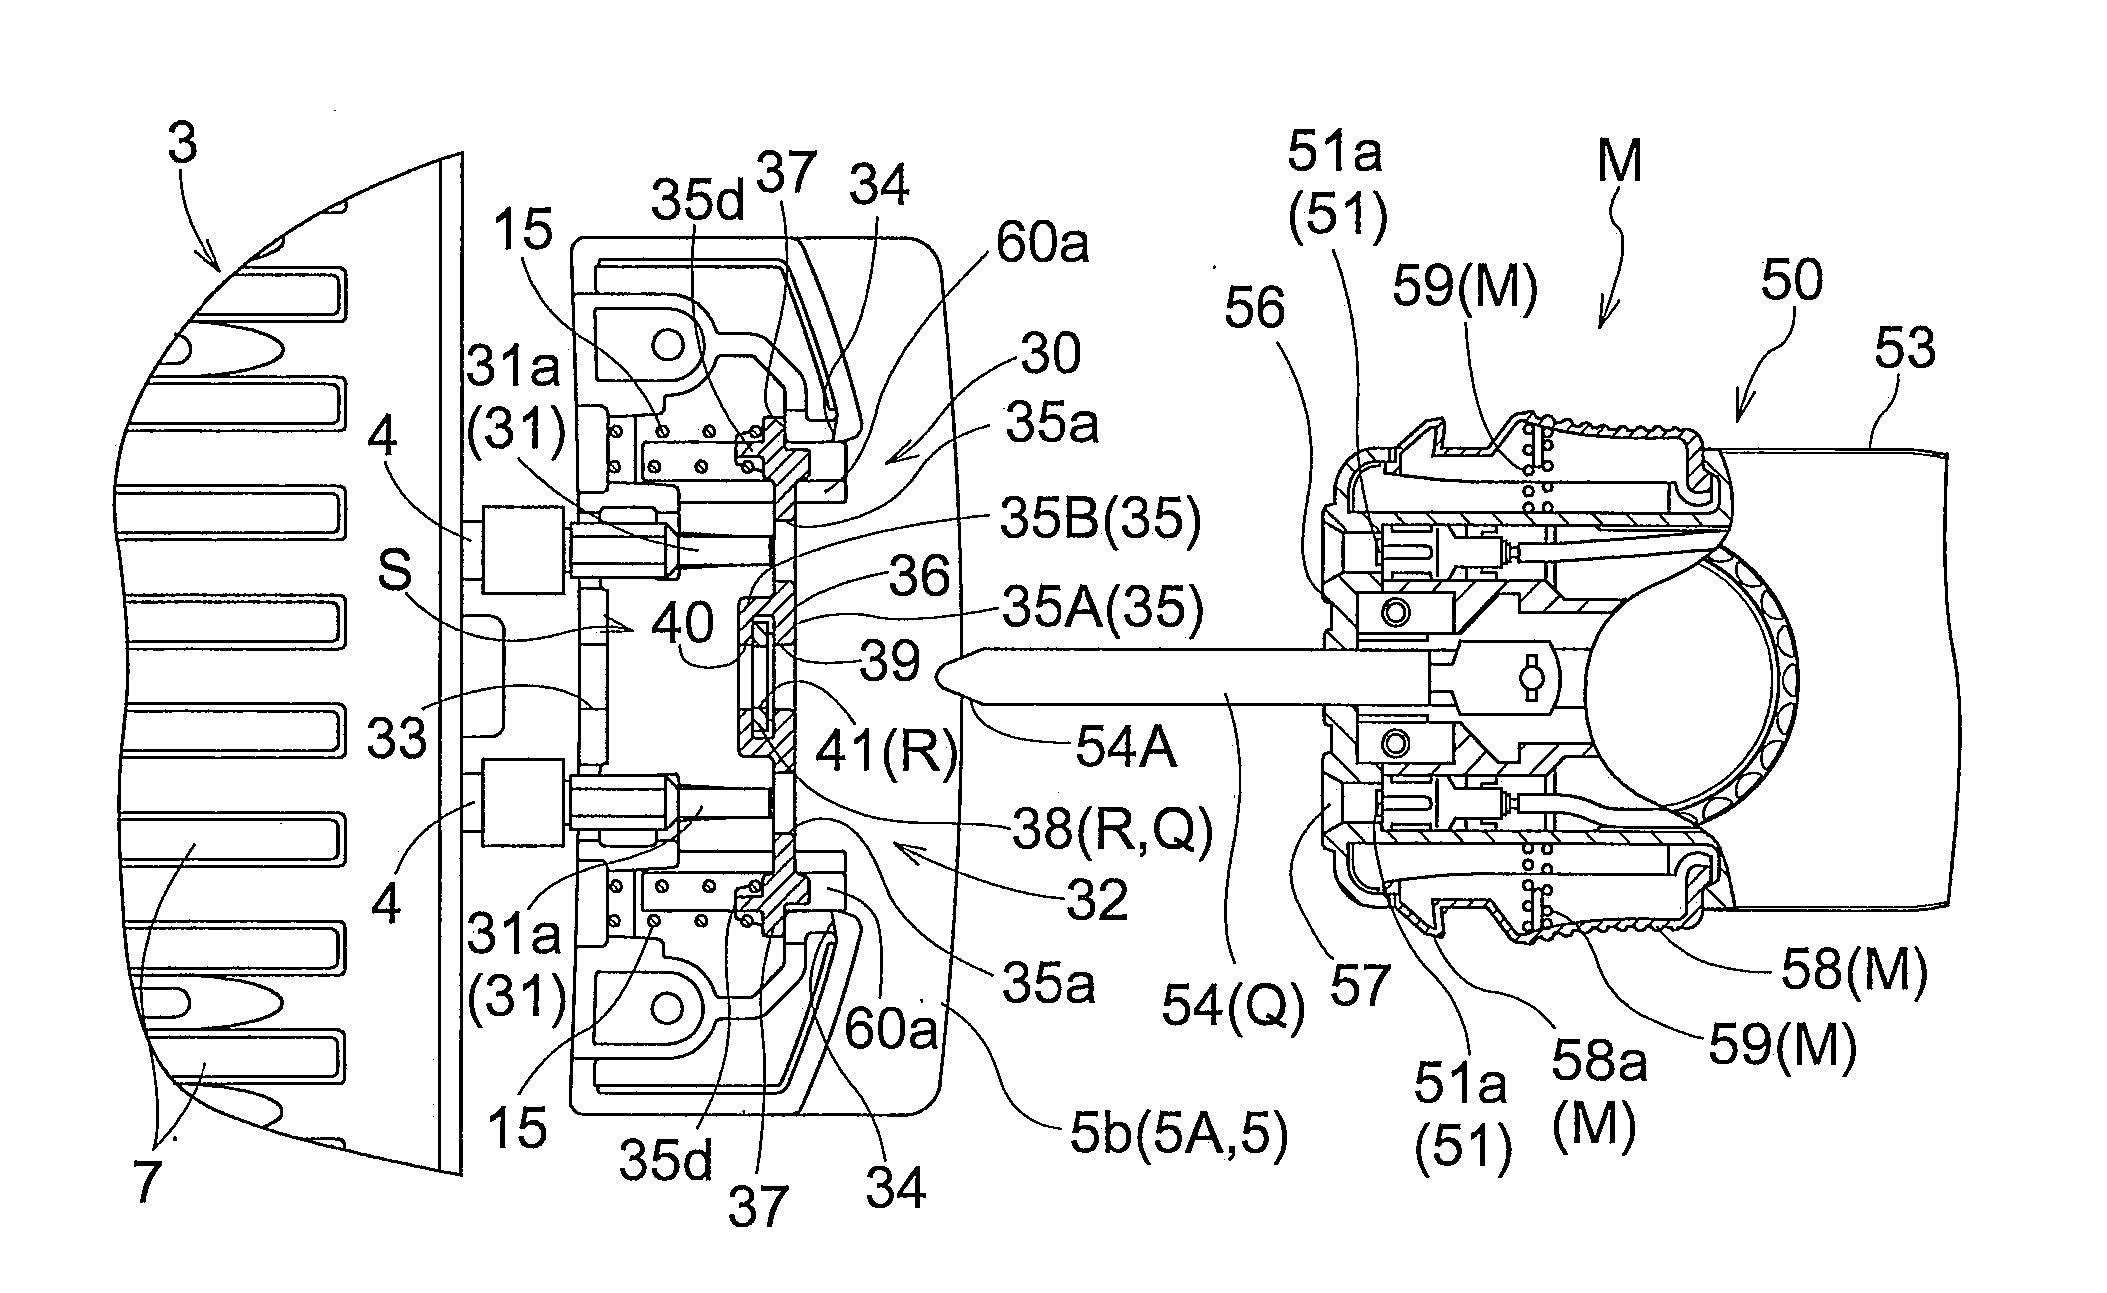 Electrothermal Heating Device